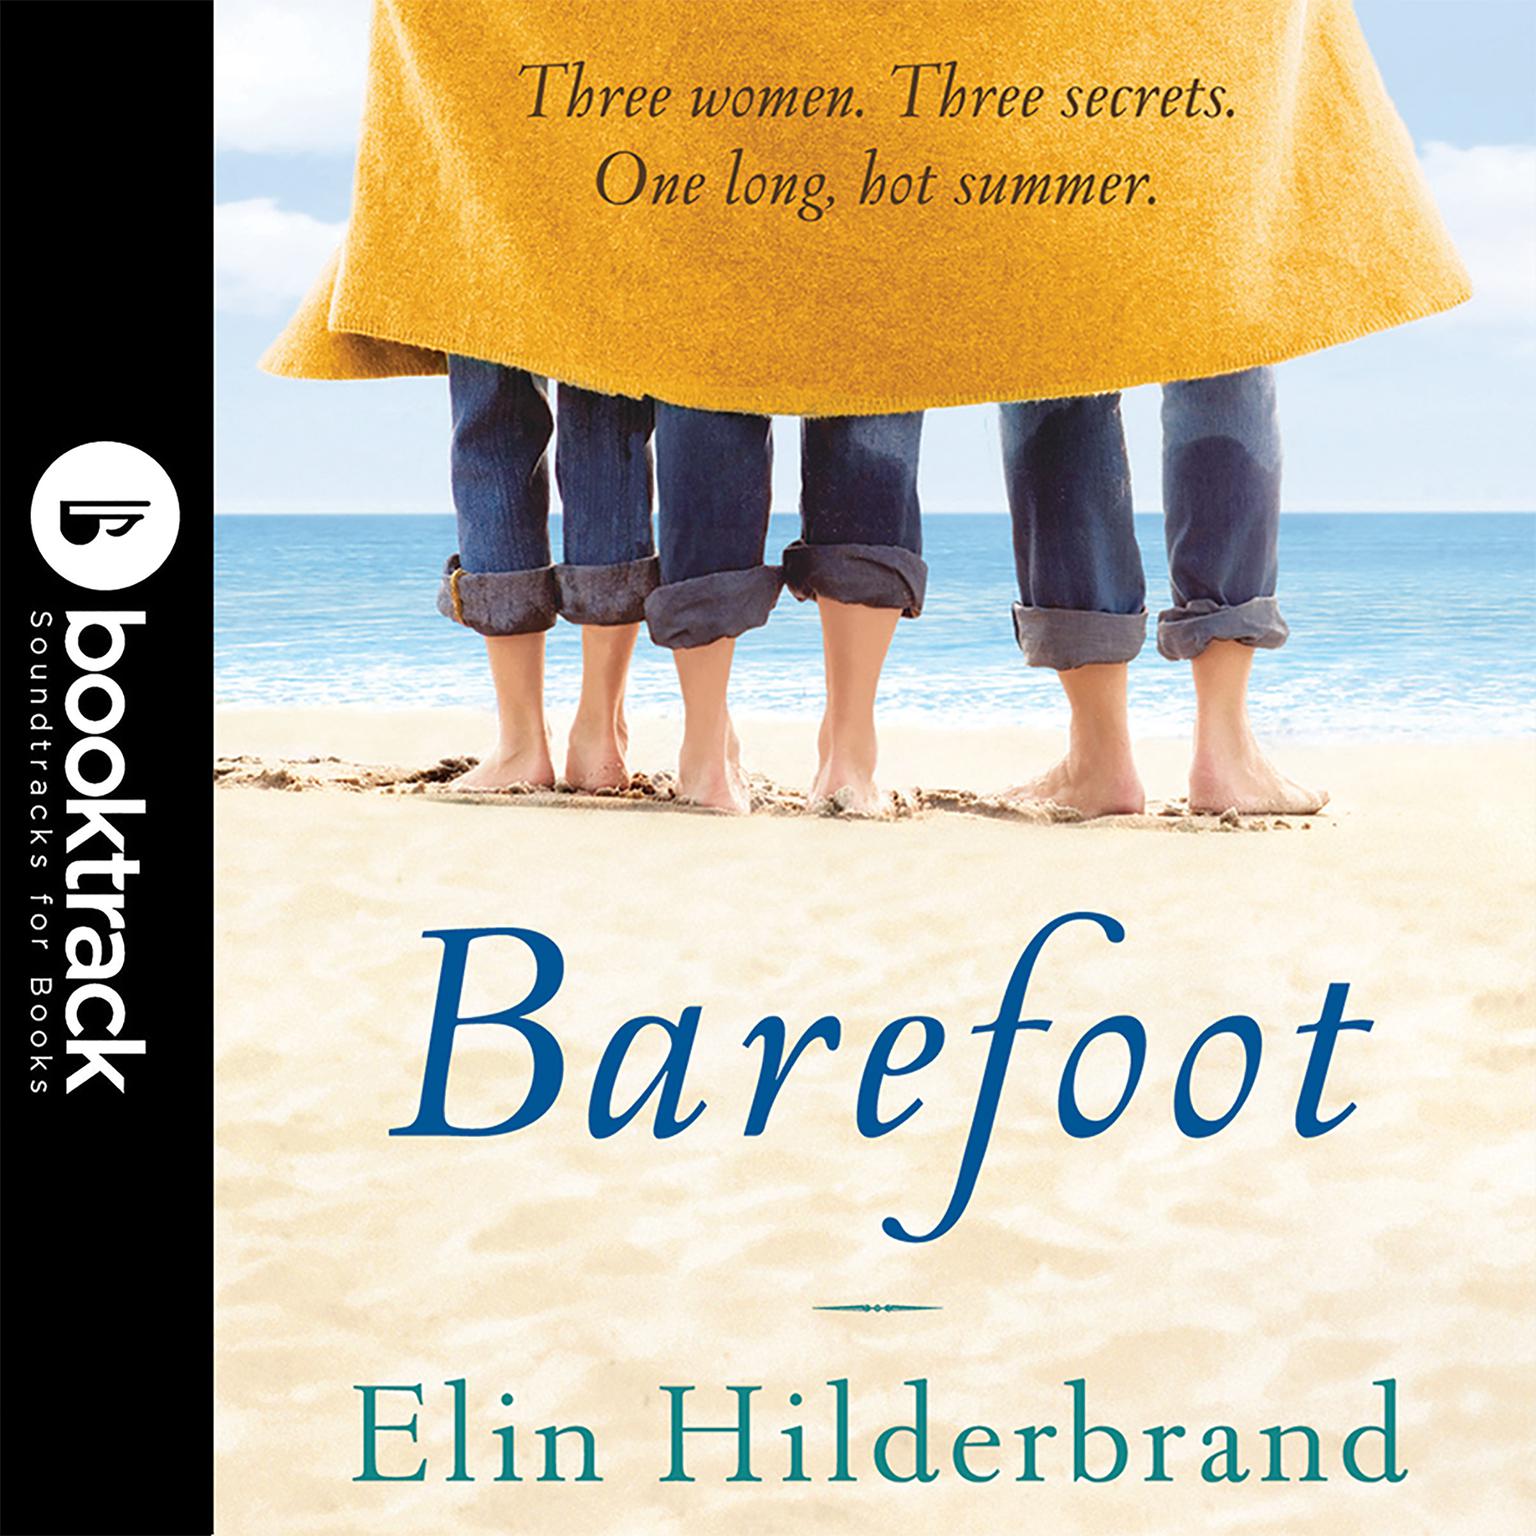 Barefoot: Booktrack Edition (Abridged): Booktrack Edition Audiobook, by Elin Hilderbrand